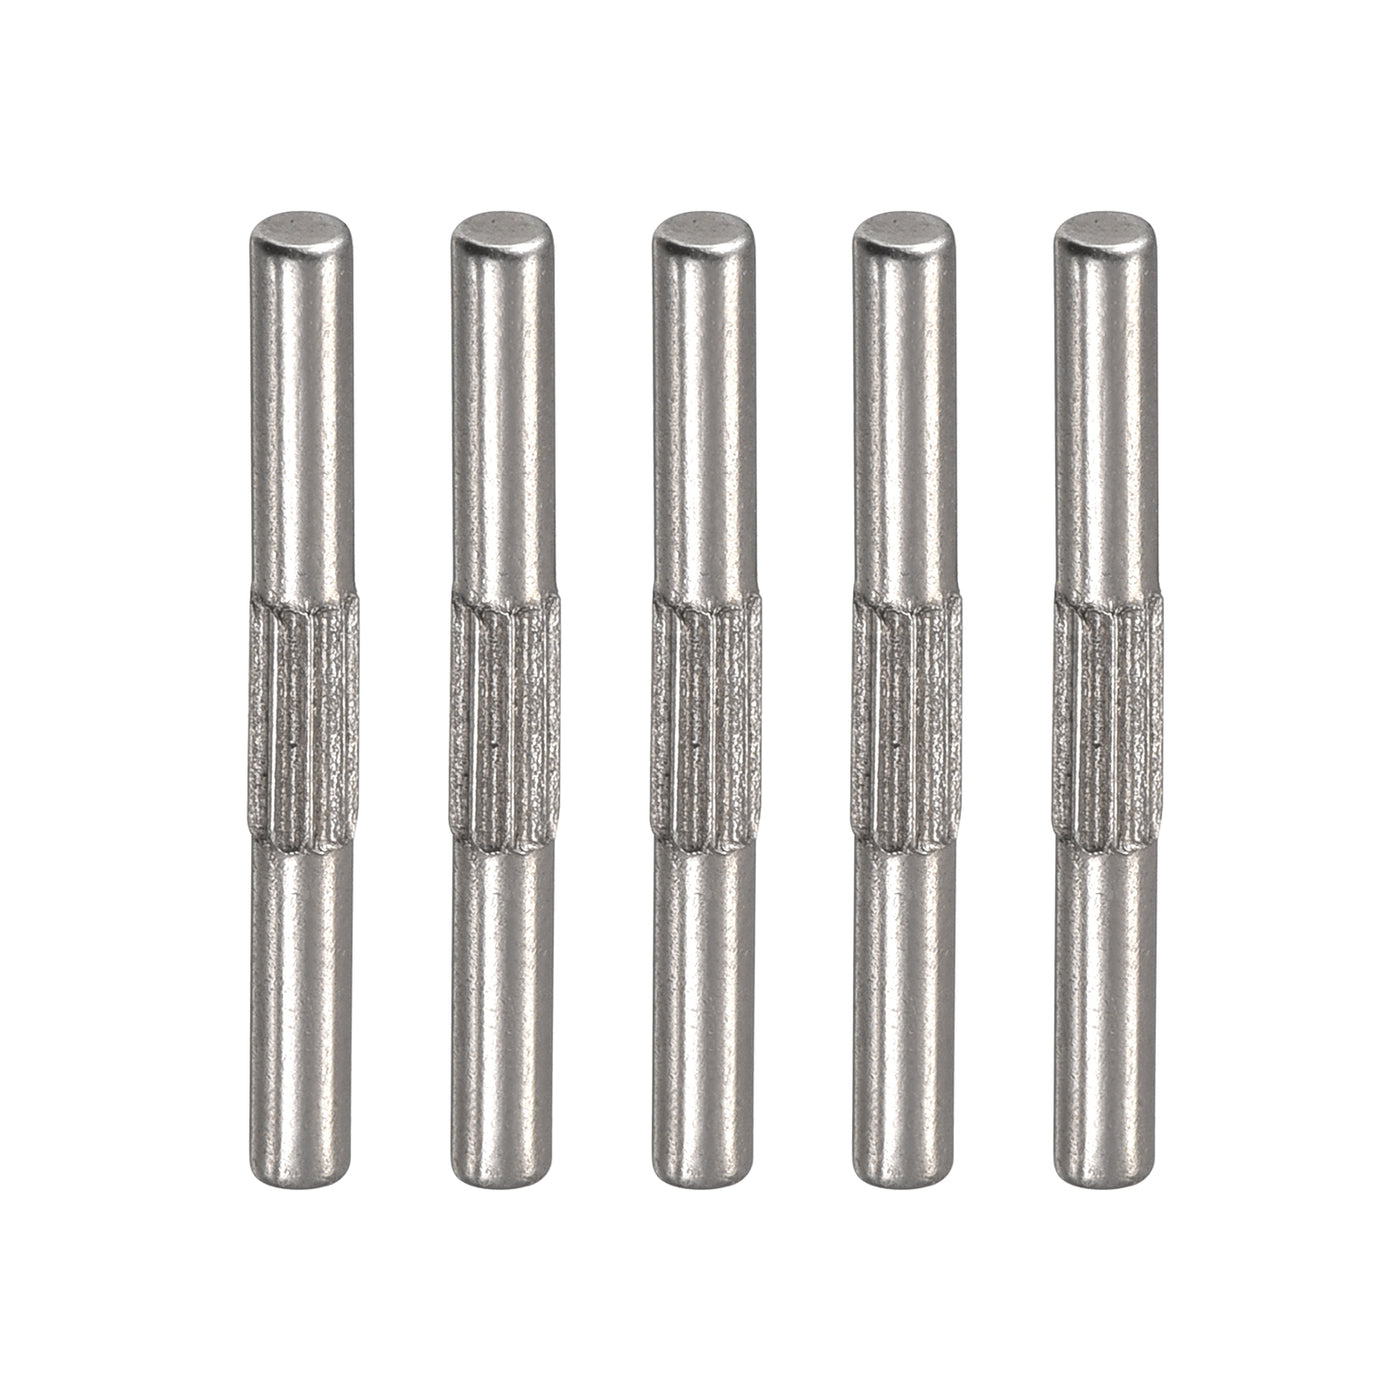 uxcell Uxcell 2x20mm 304 Stainless Steel Dowel Pins, 5Pcs Center Knurled Chamfered End Pin